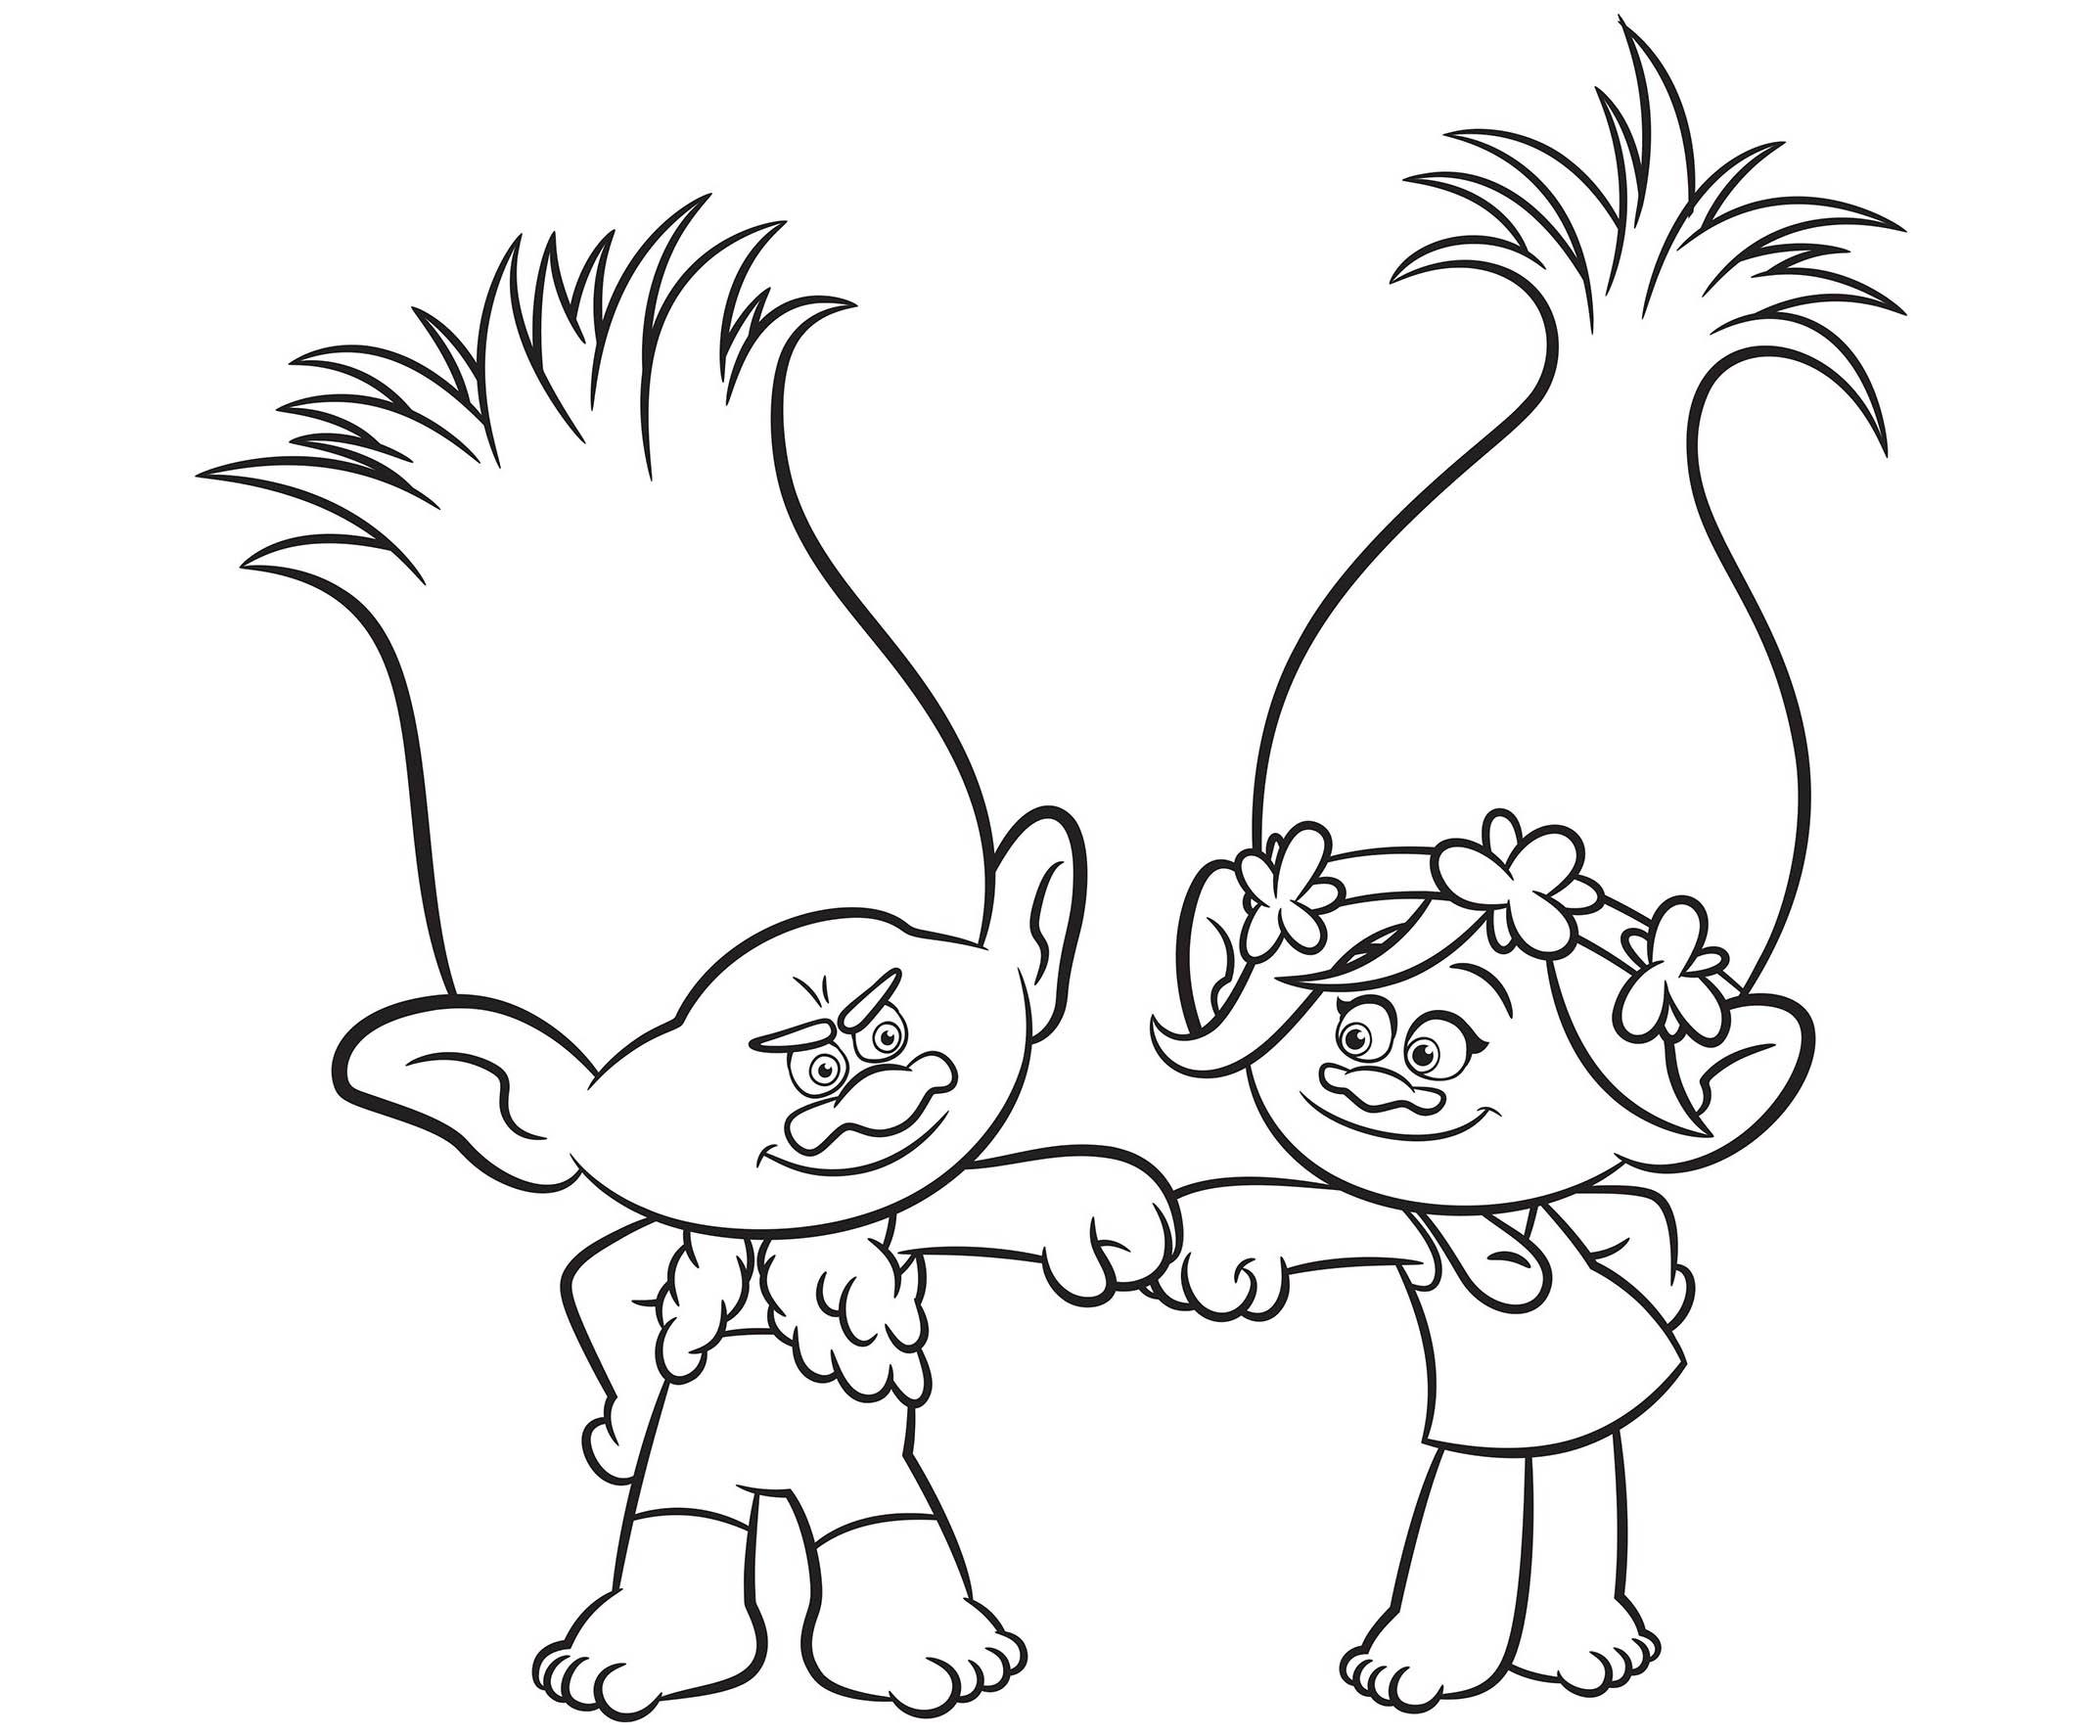 Trolls to download for free - Trolls Kids Coloring Pages